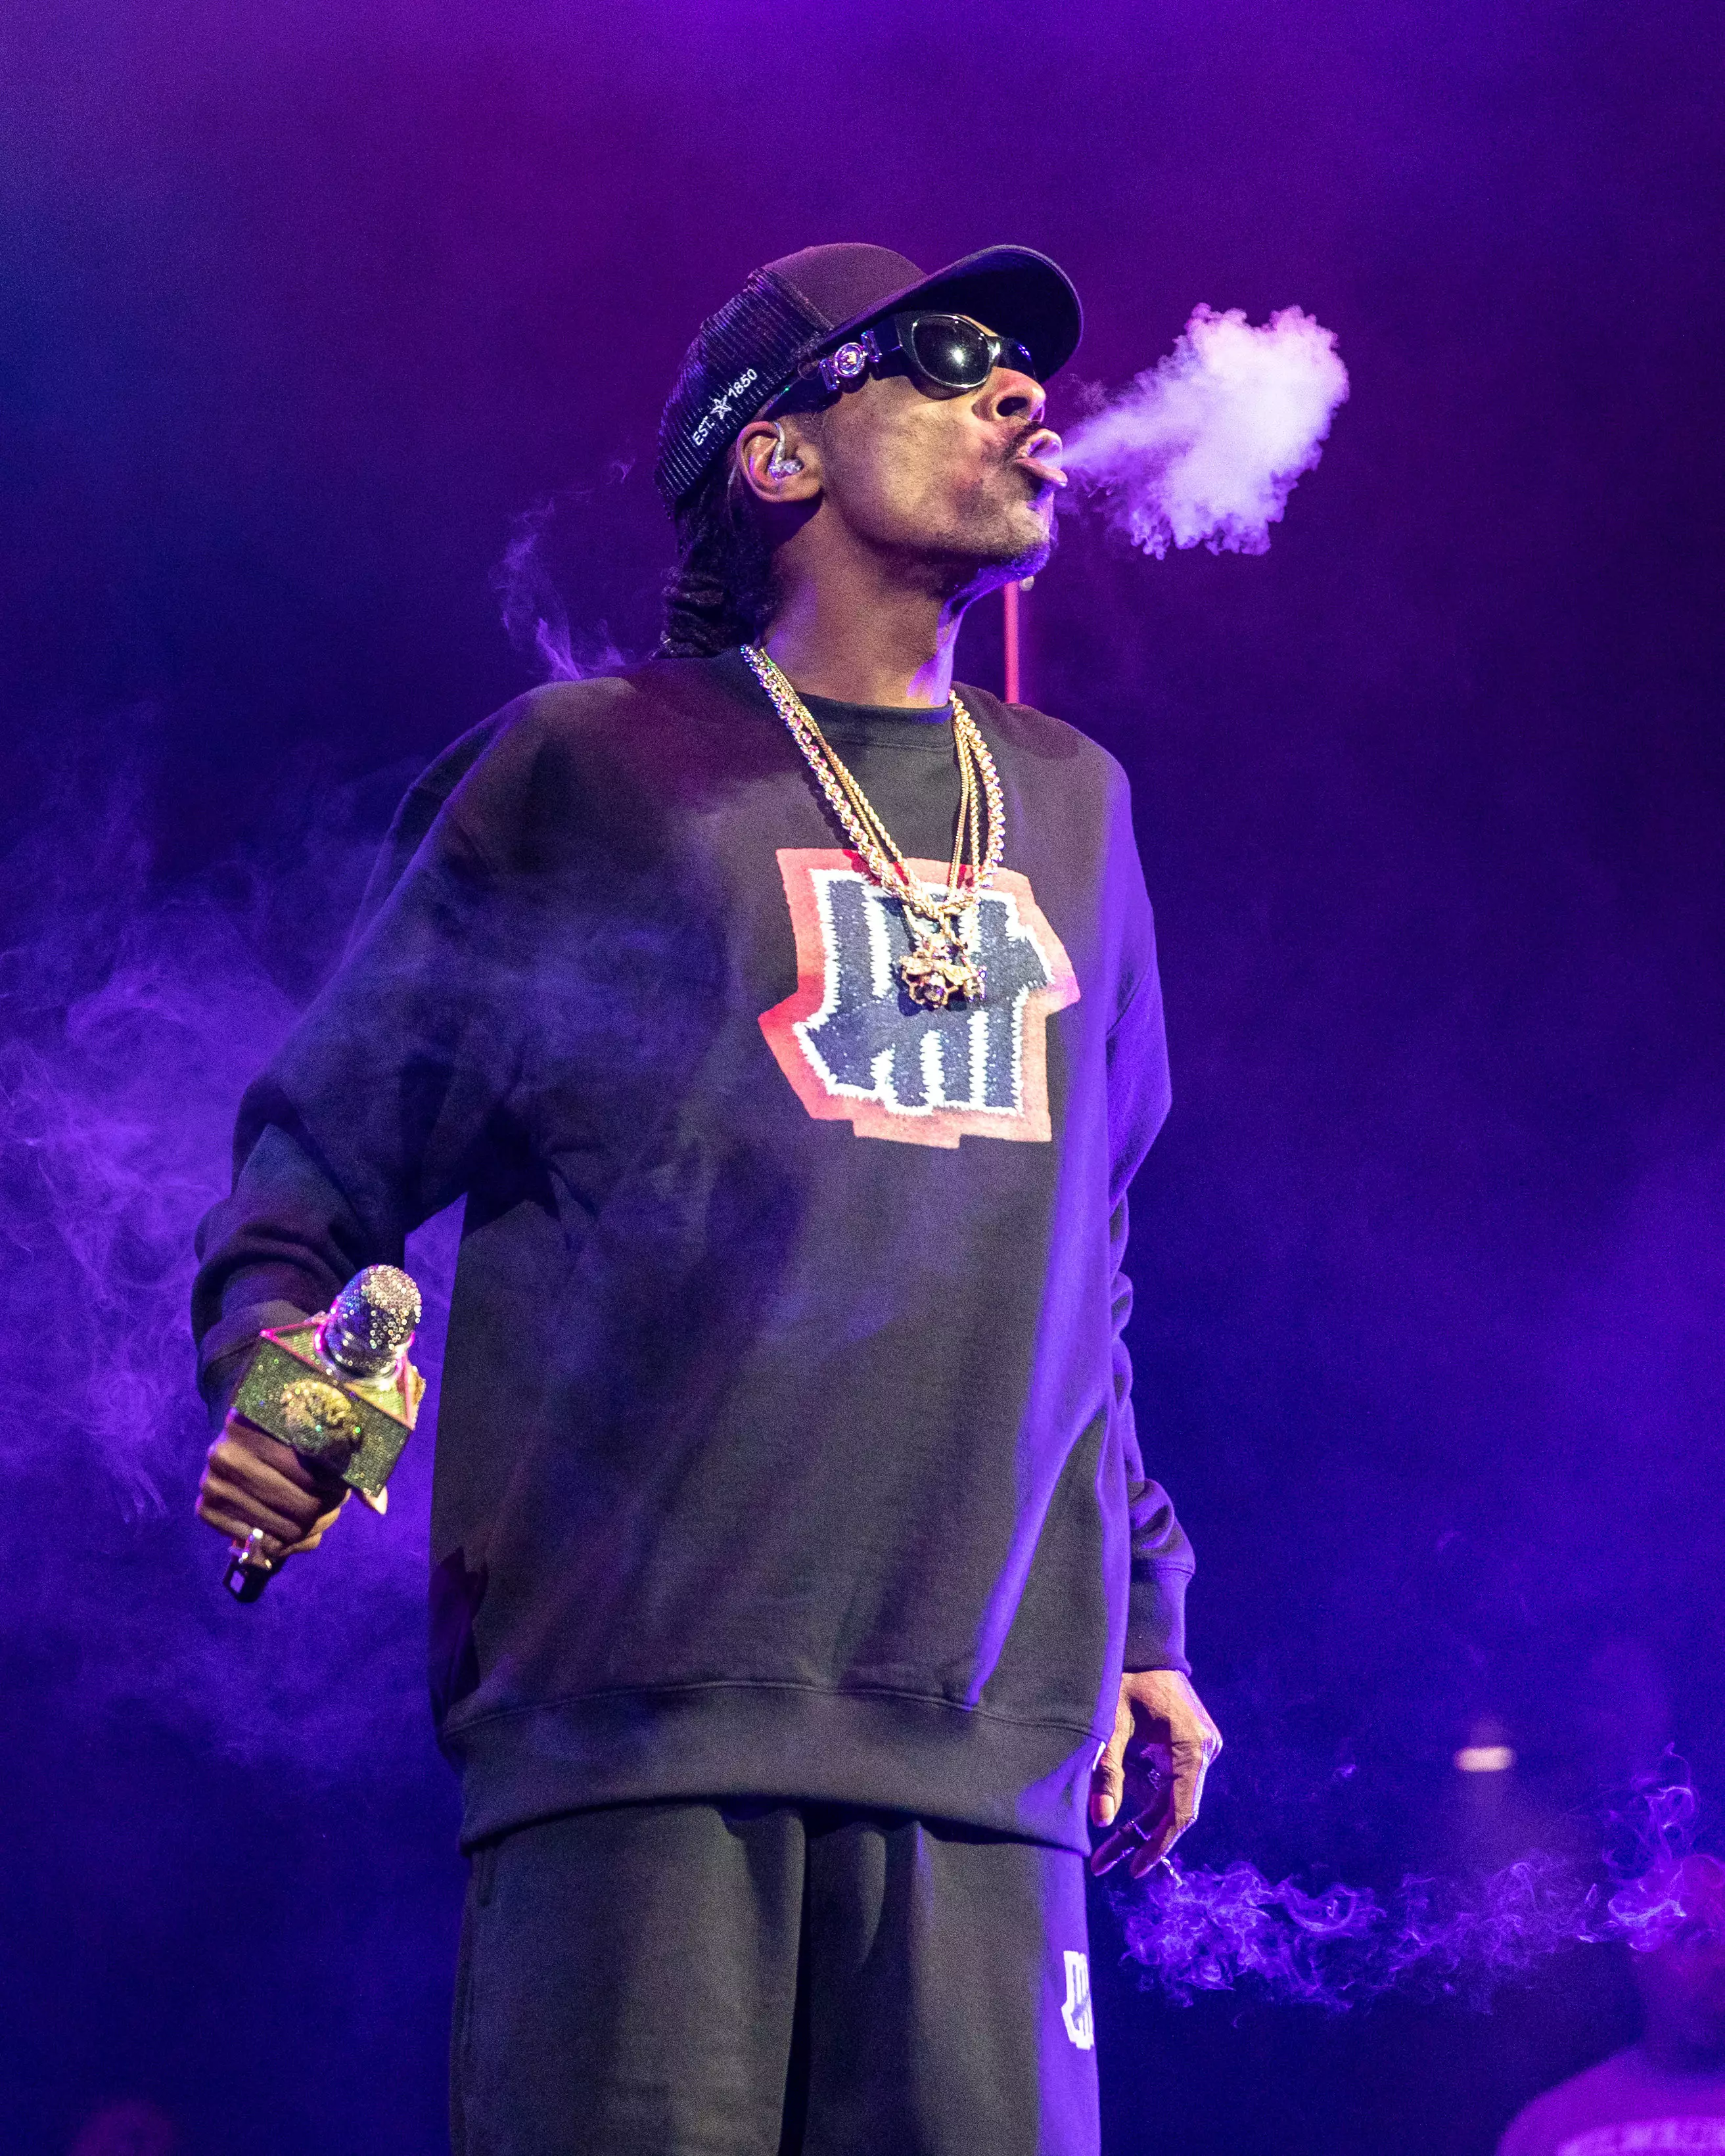 The rapper has long been an outspoken advocate of legalising weed.